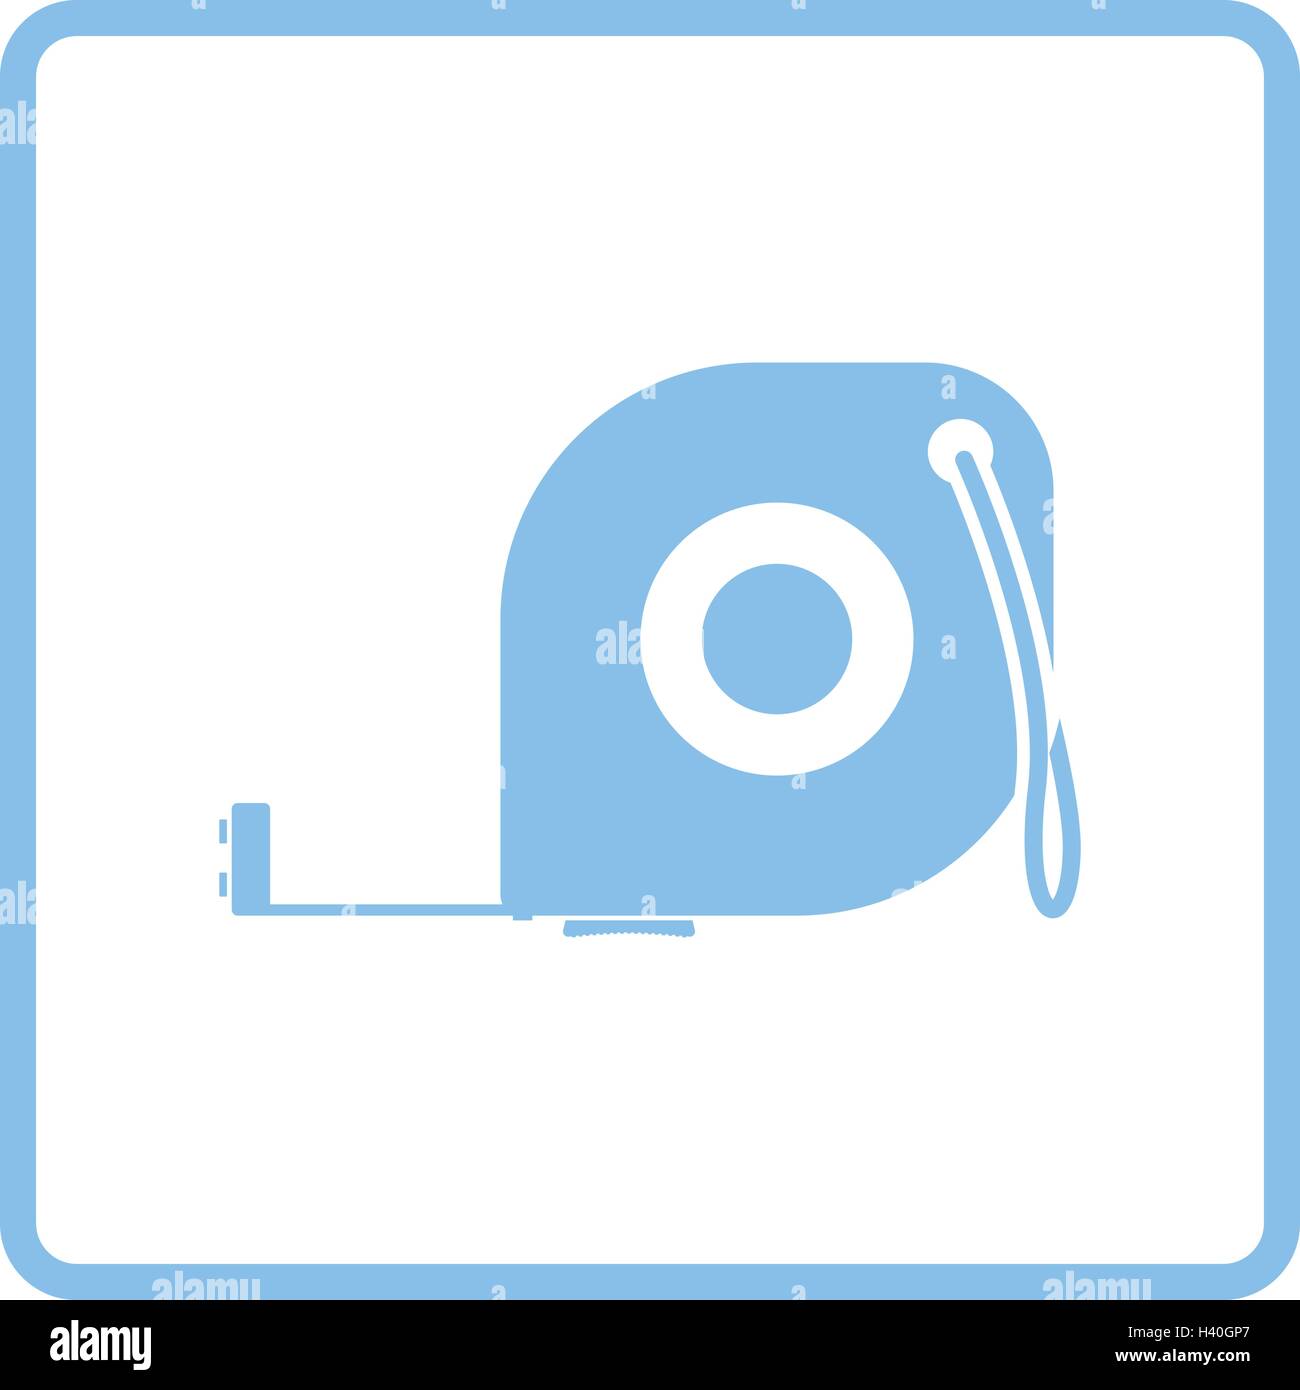 Icon of constriction tape measure. Blue frame design. Vector illustration. Stock Vector